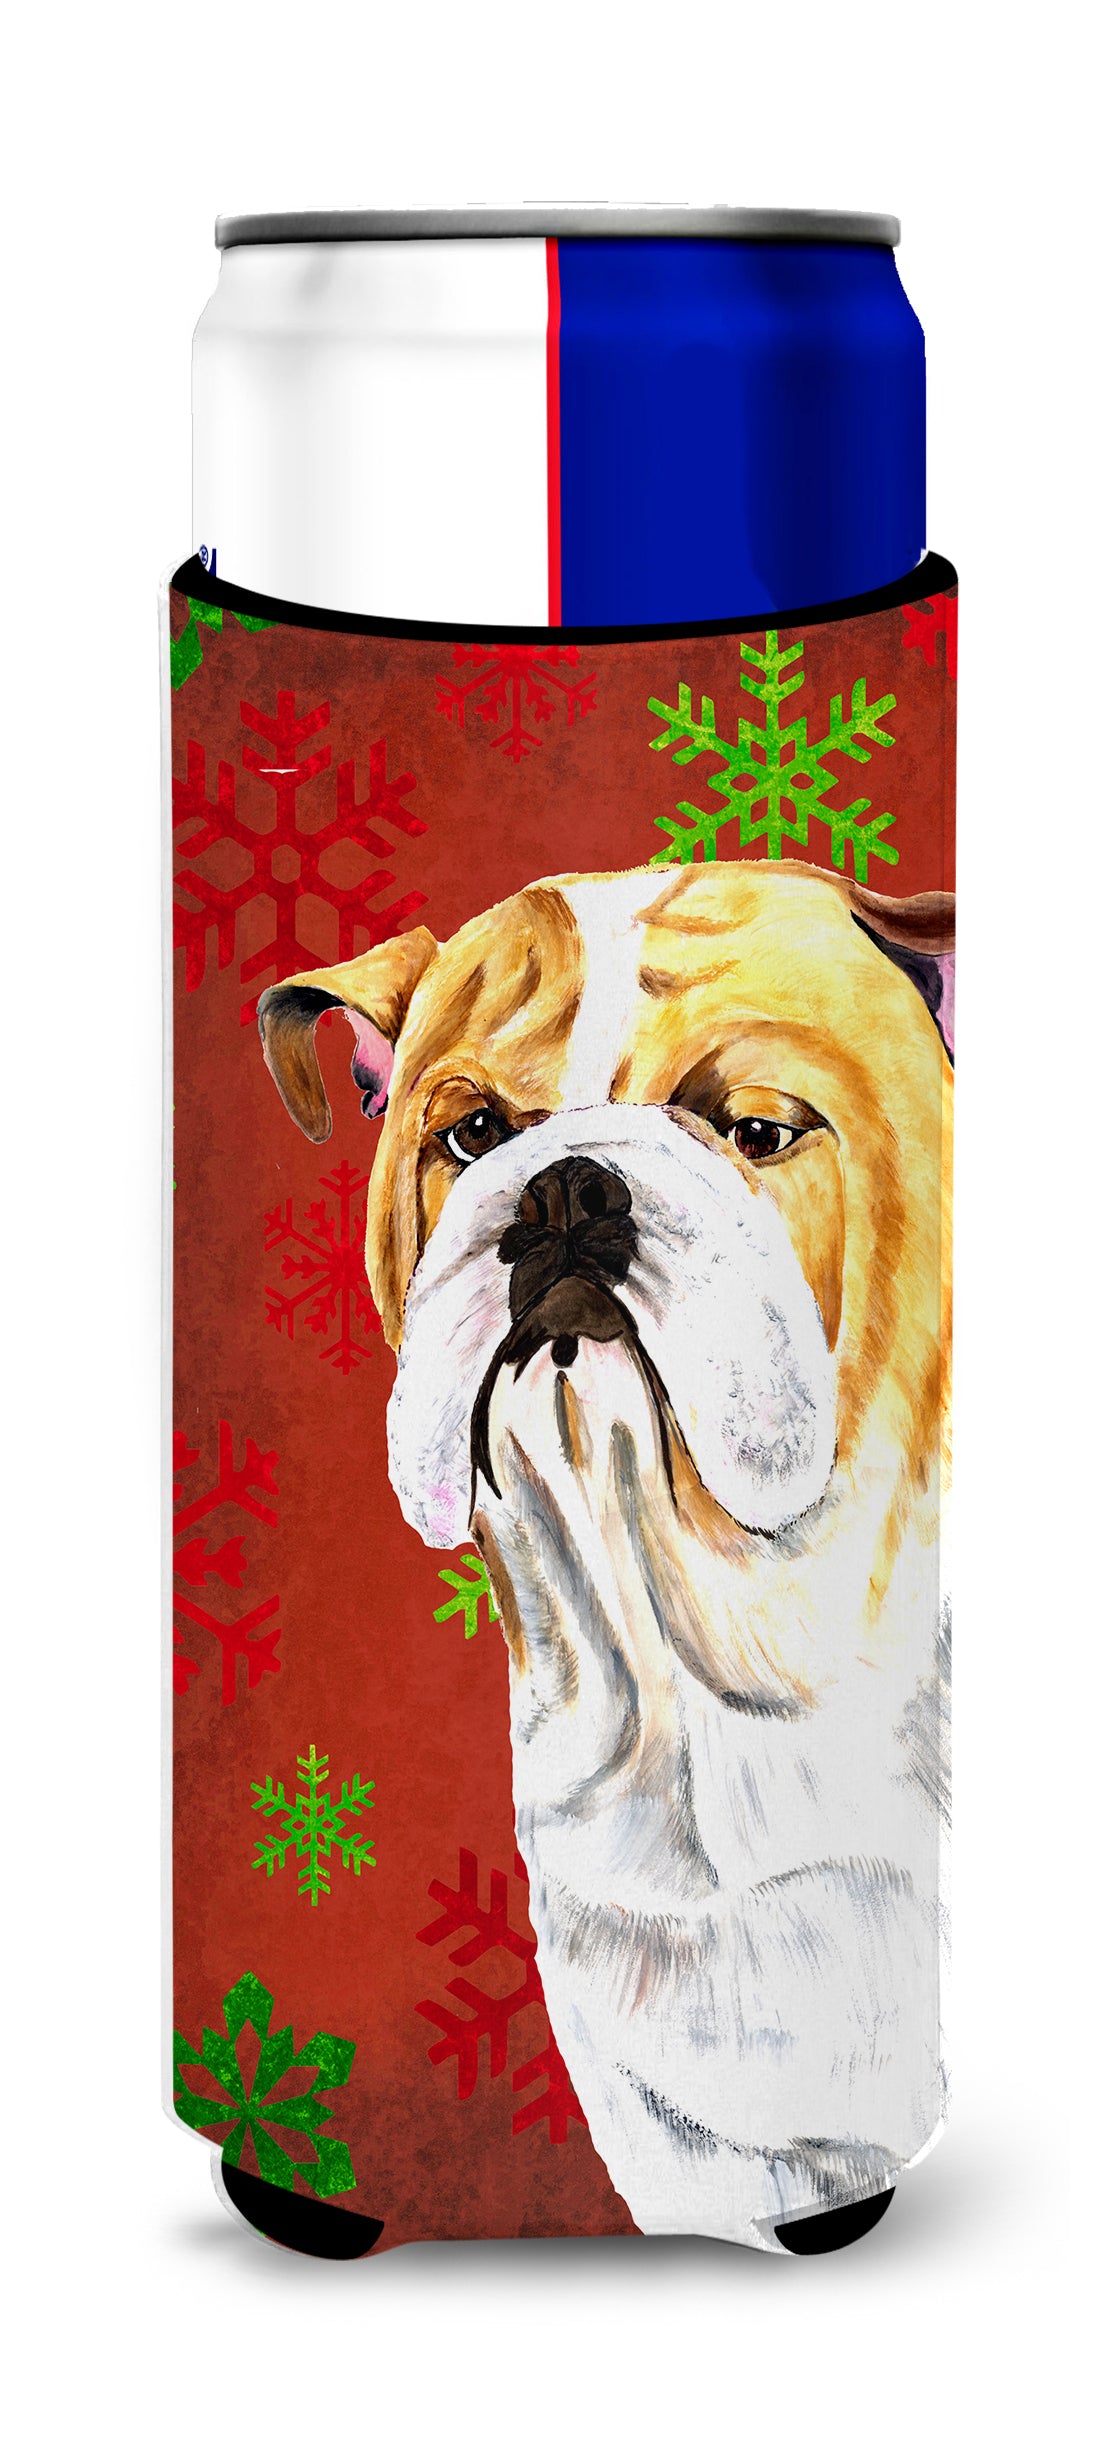 Bulldog English Red and Green Snowflakes Holiday Christmas Ultra Beverage Insulators for slim cans SC9414MUK.